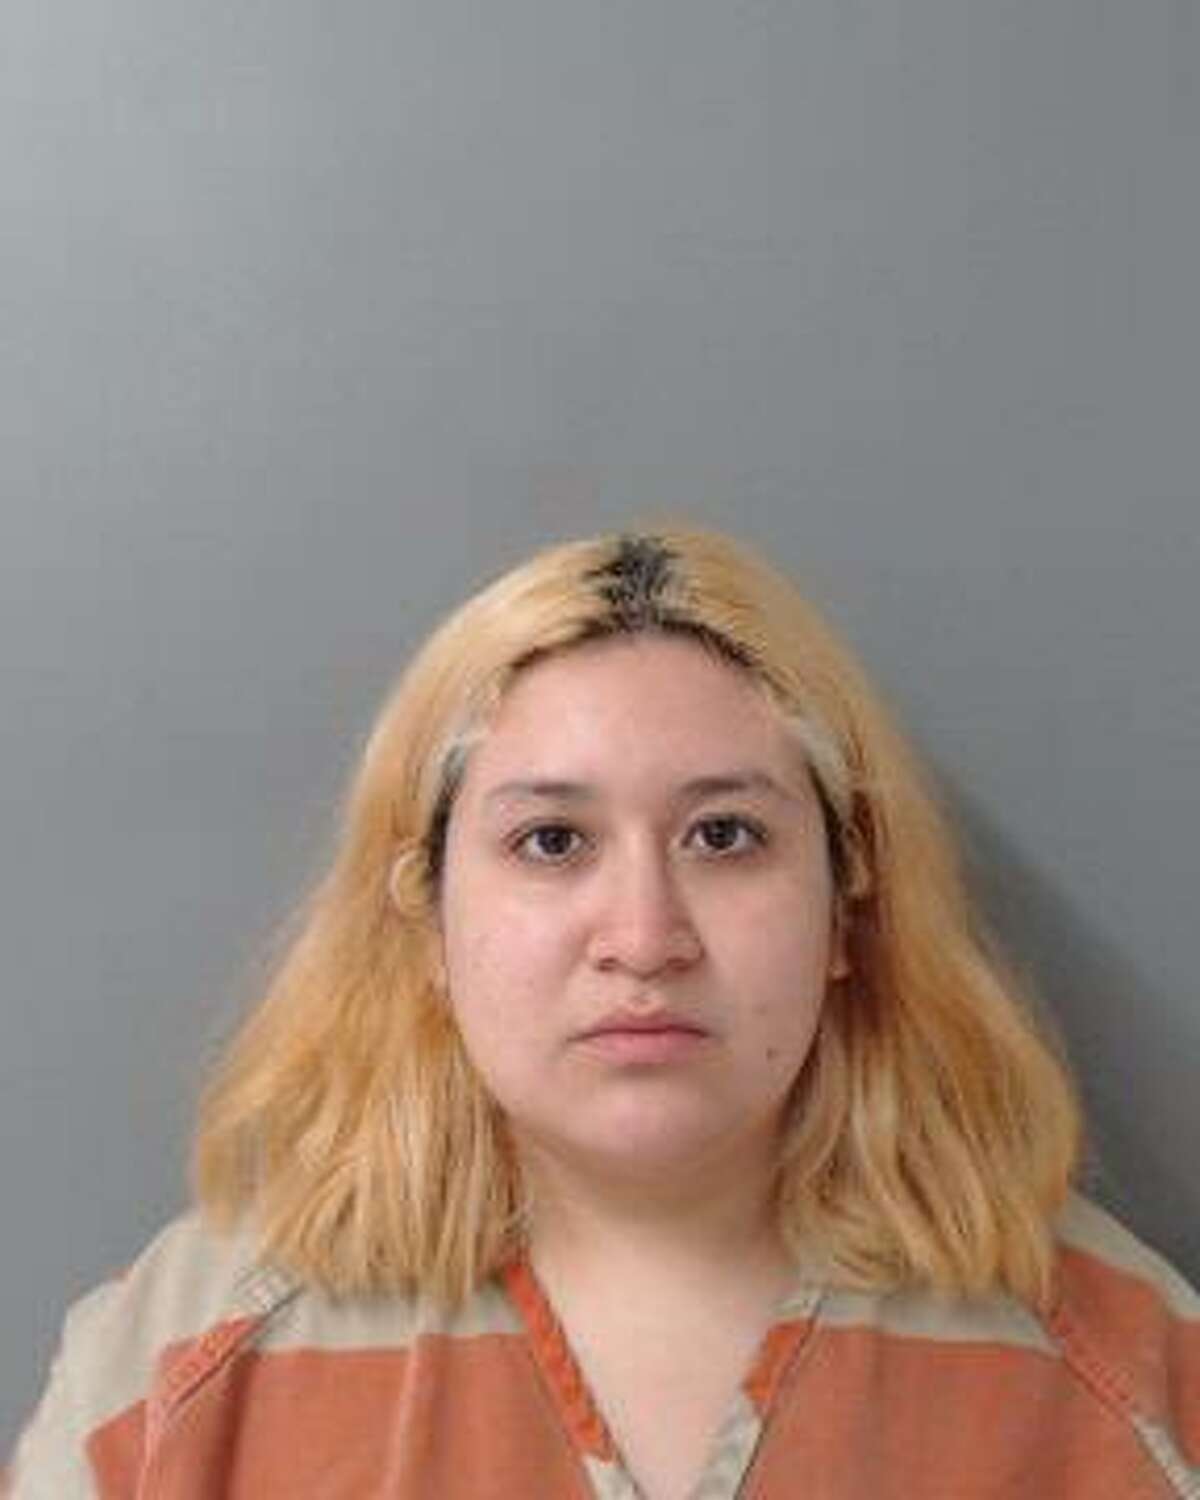 Laredo PD Couple had threesome with 16-year-old girl